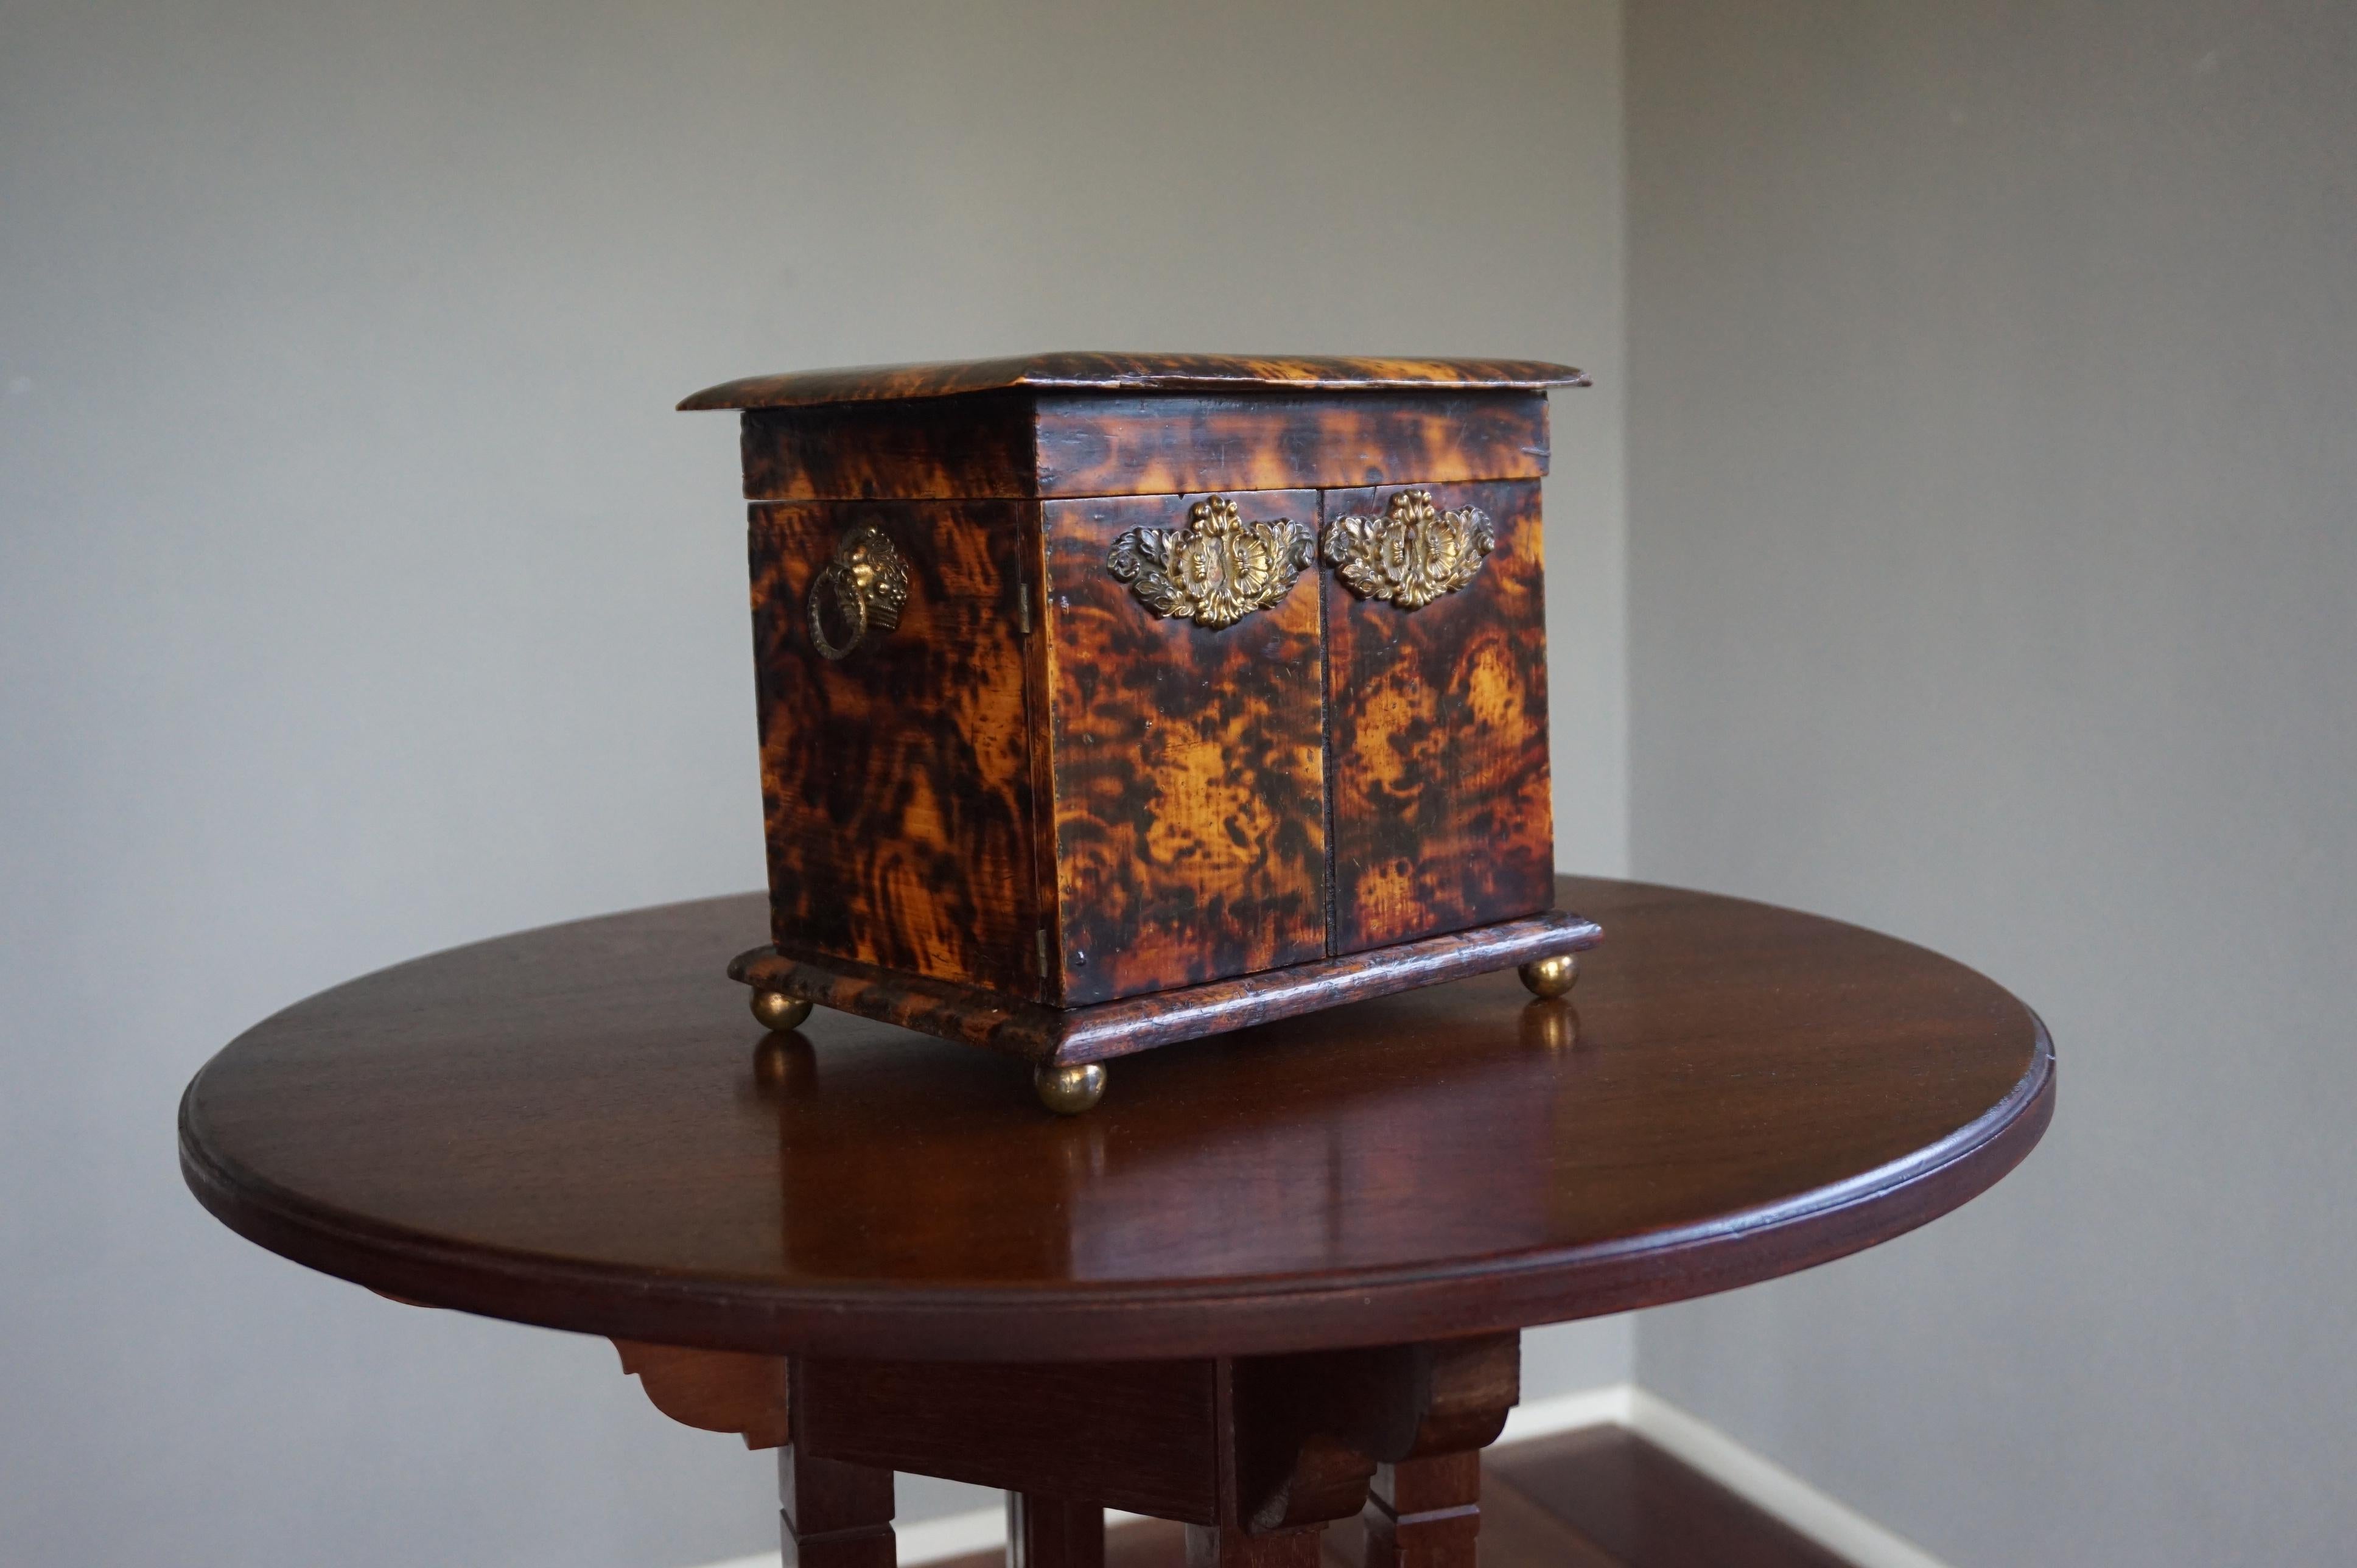 Handcrafted 19th century box with great patina.

We do understand why it is no longer allowed to ship real tortoise shell to many countries. However, it is disappointing that 19th century pieces are banned too, because back then most of the shell